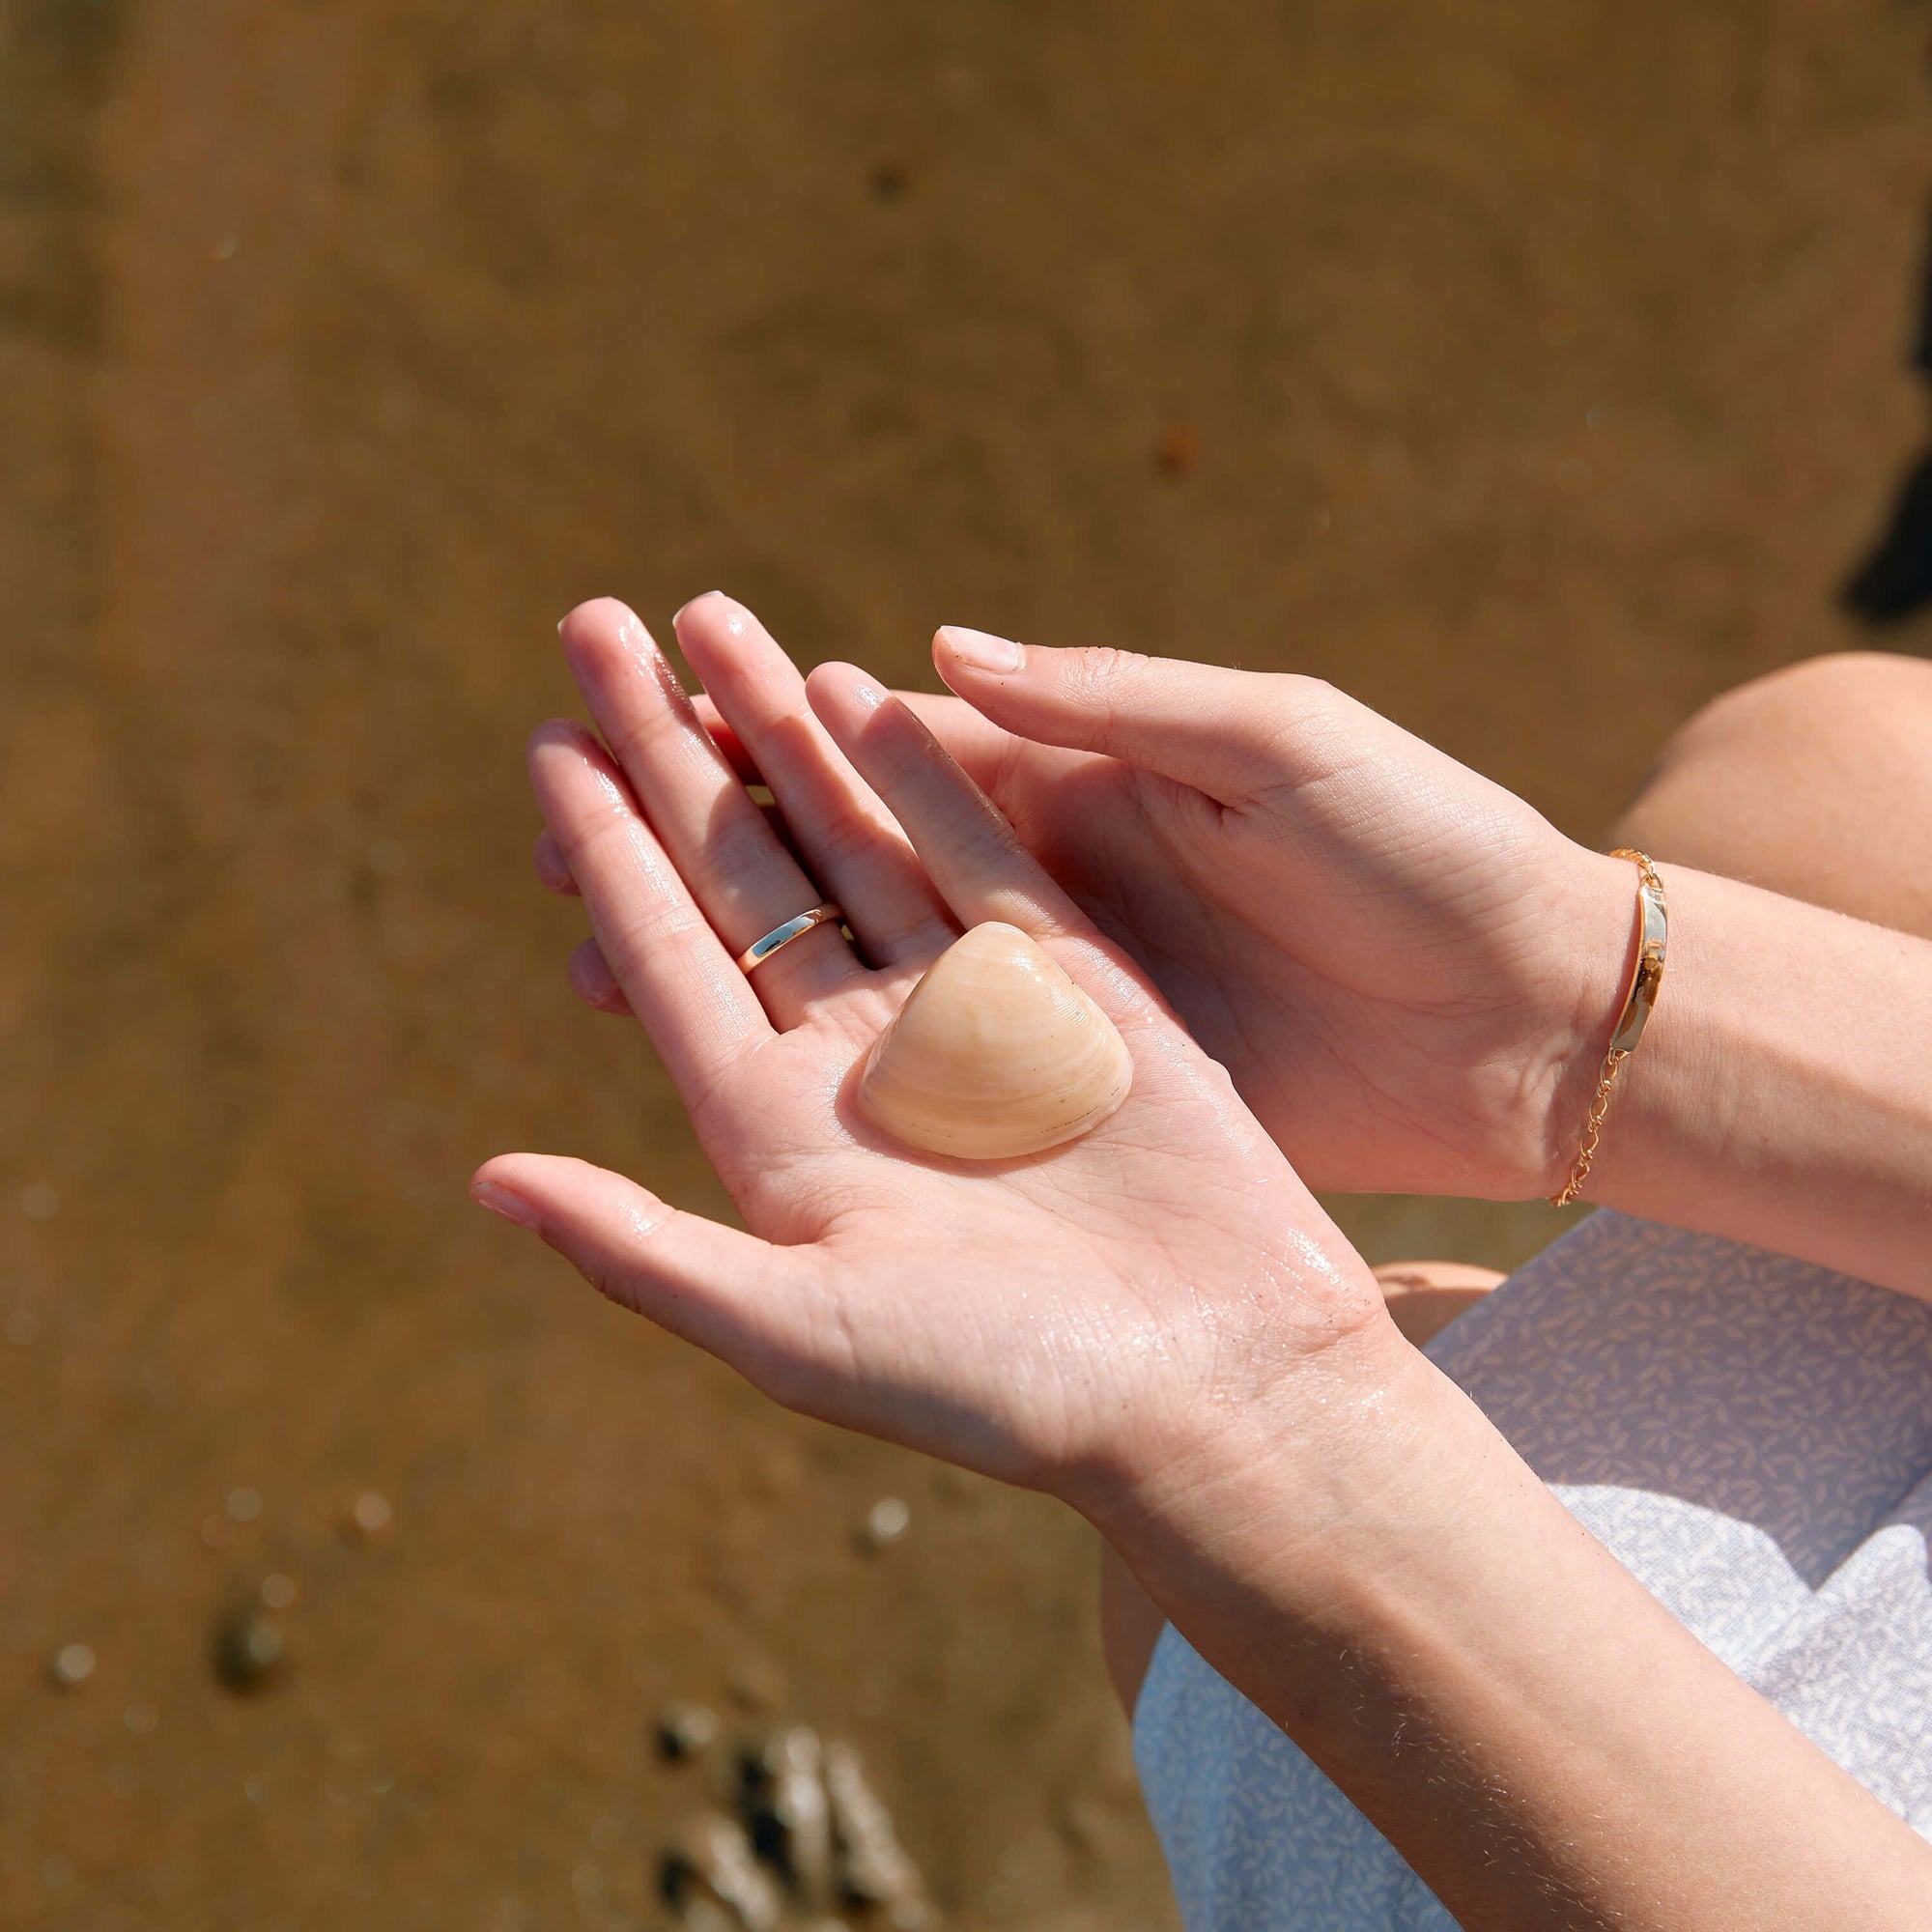 Model holding shell in her hands on a NZ beach